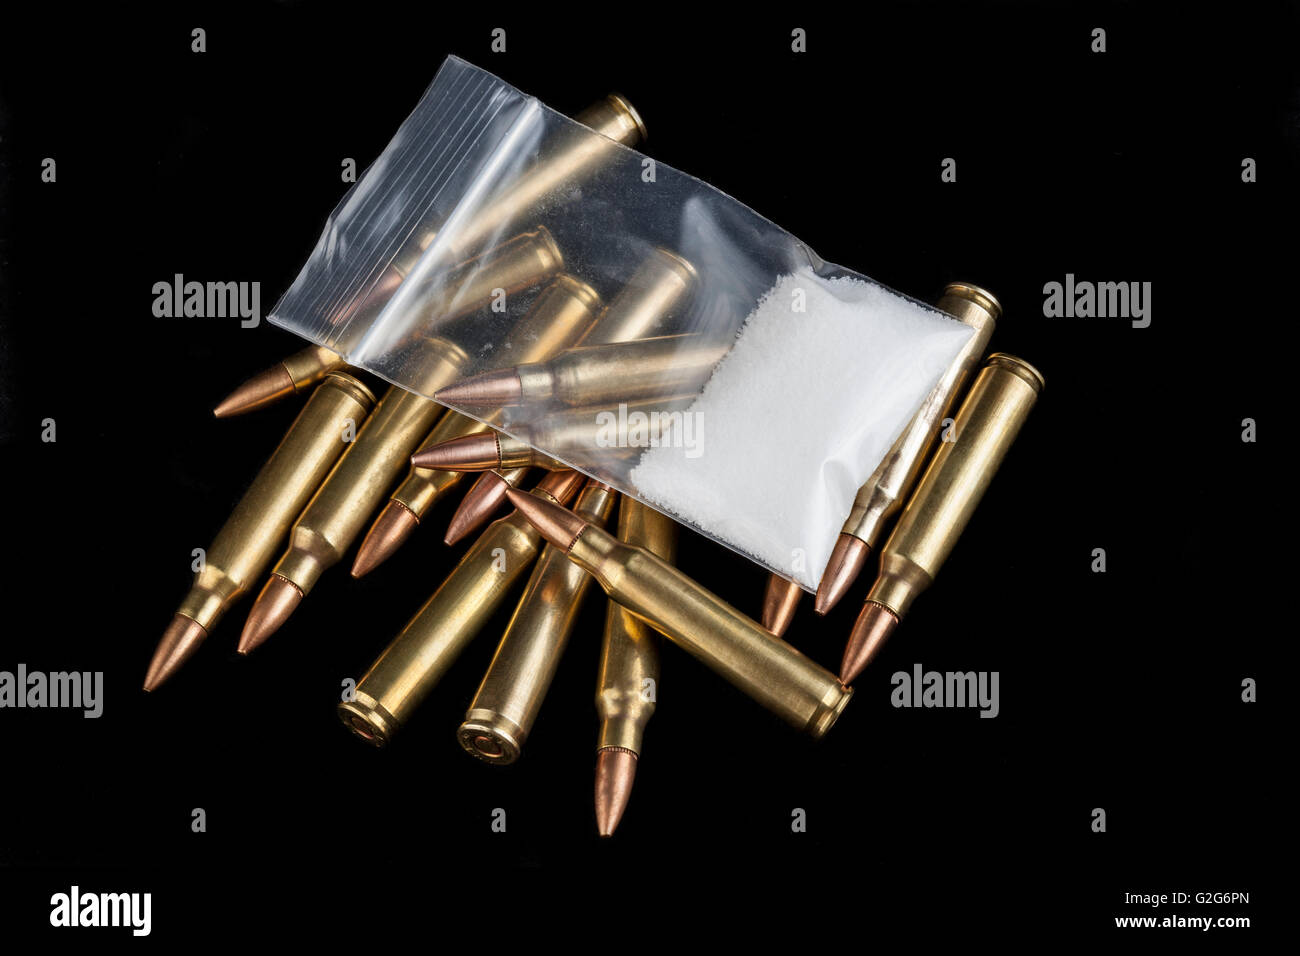 Rifle bullets close-up on black background with a bag of white drug powder Stock Photo